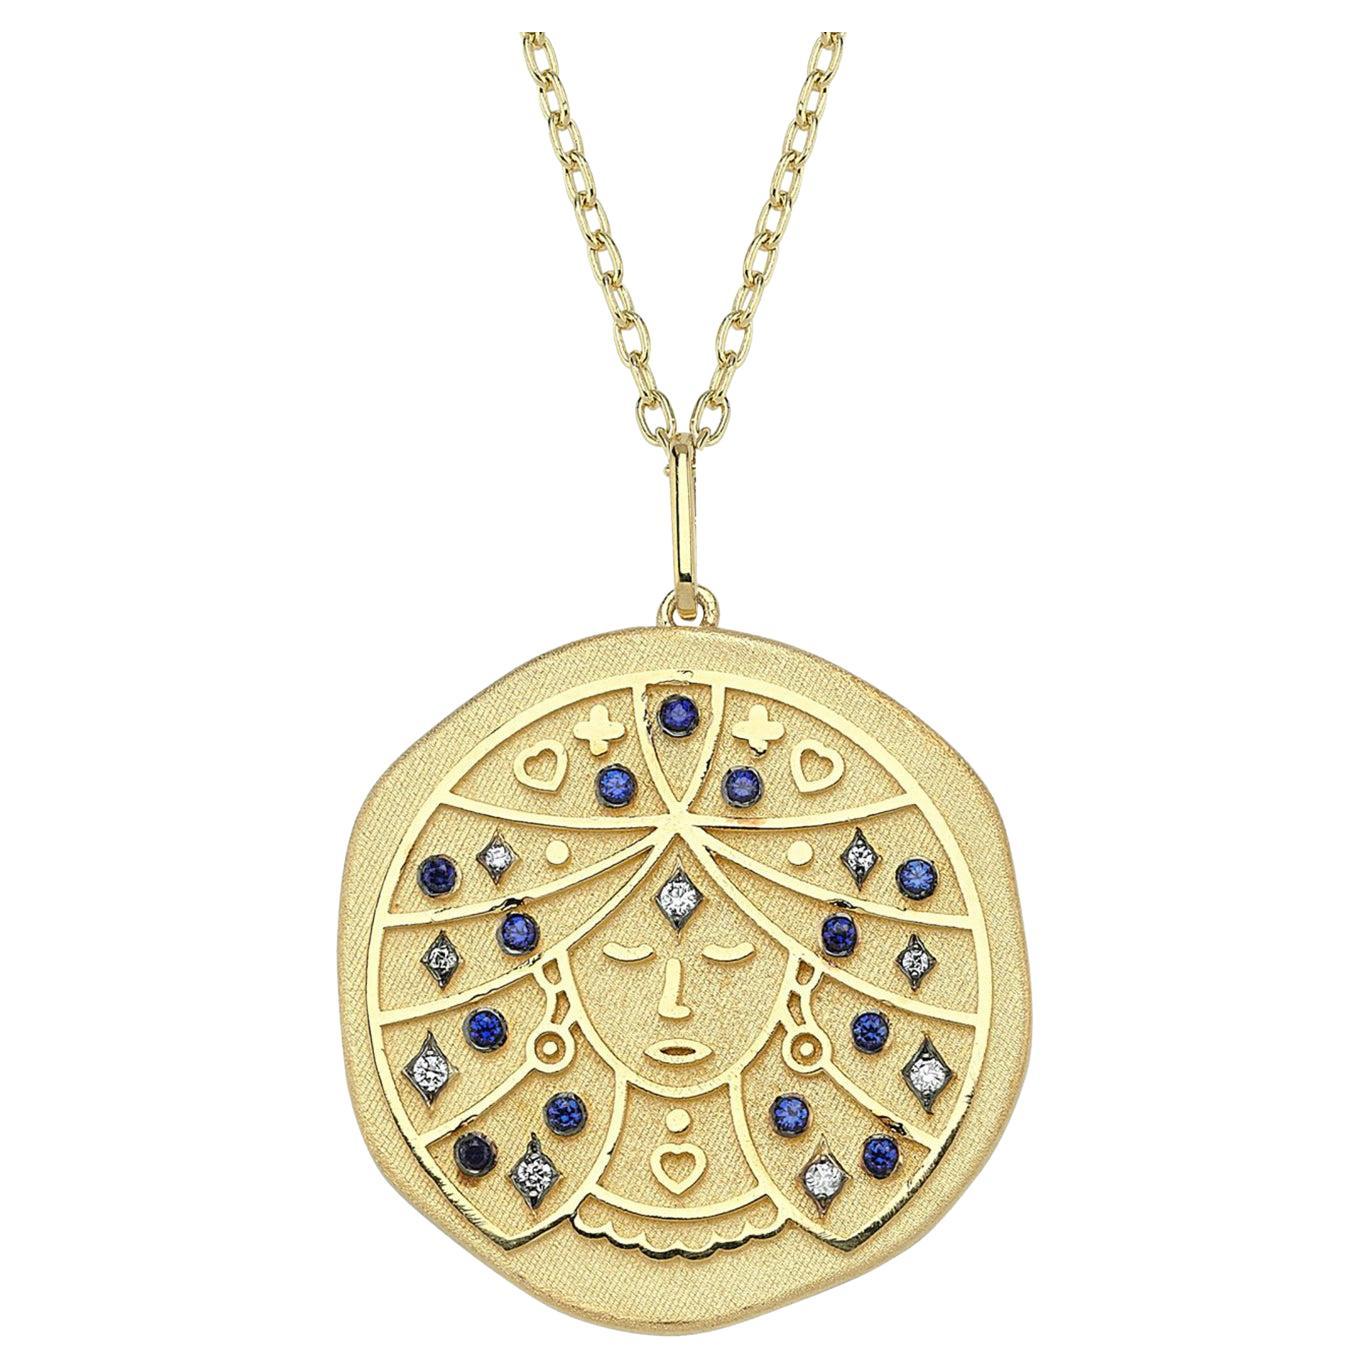 Virgo Zodiac Charm Necklace, Lucky Stone is Diamond and Sapphire 14K Yellow Gold For Sale